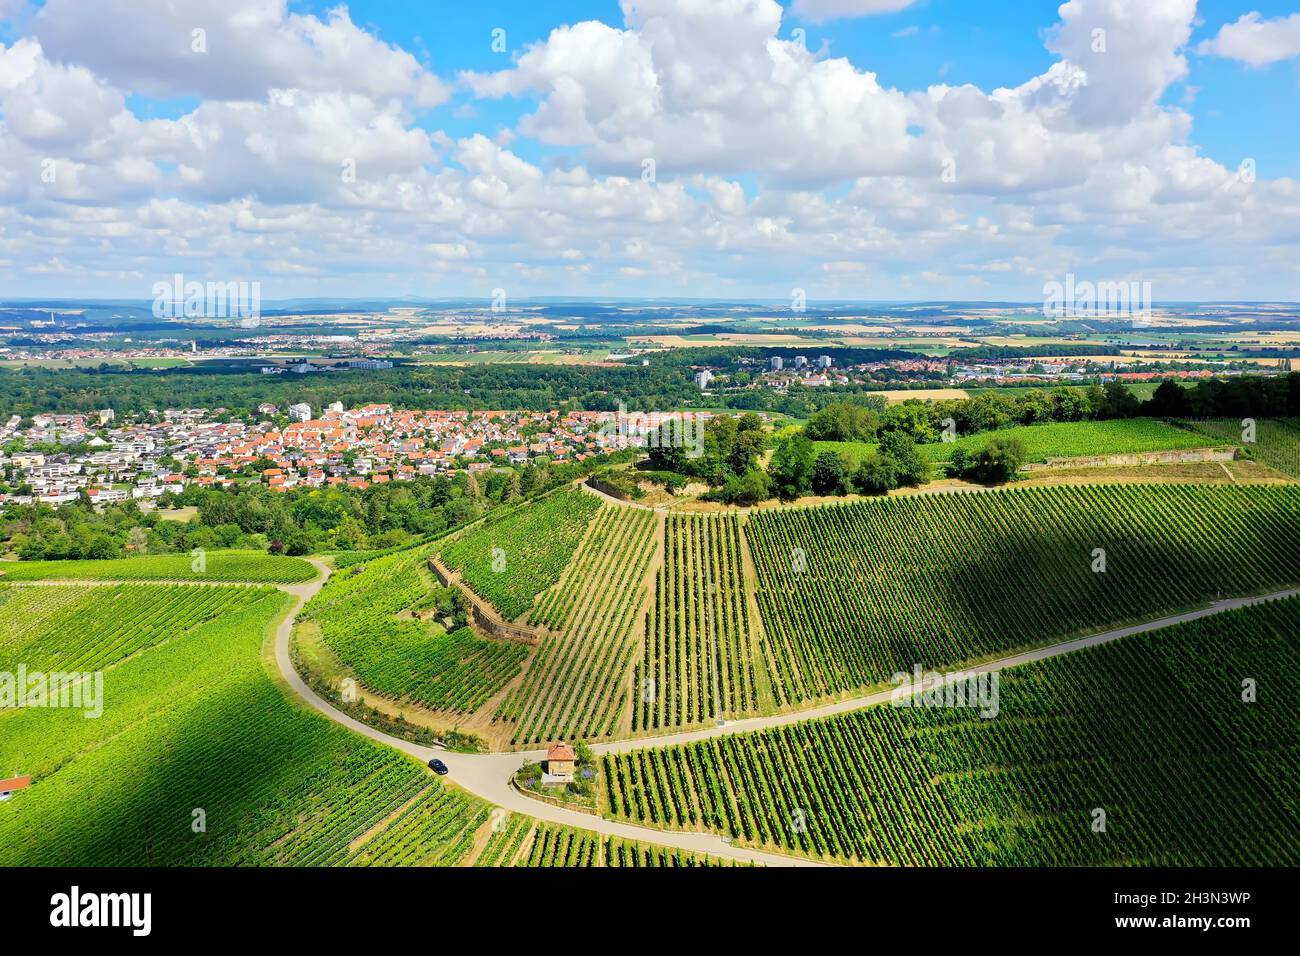 Vineyard from above Stock Photo